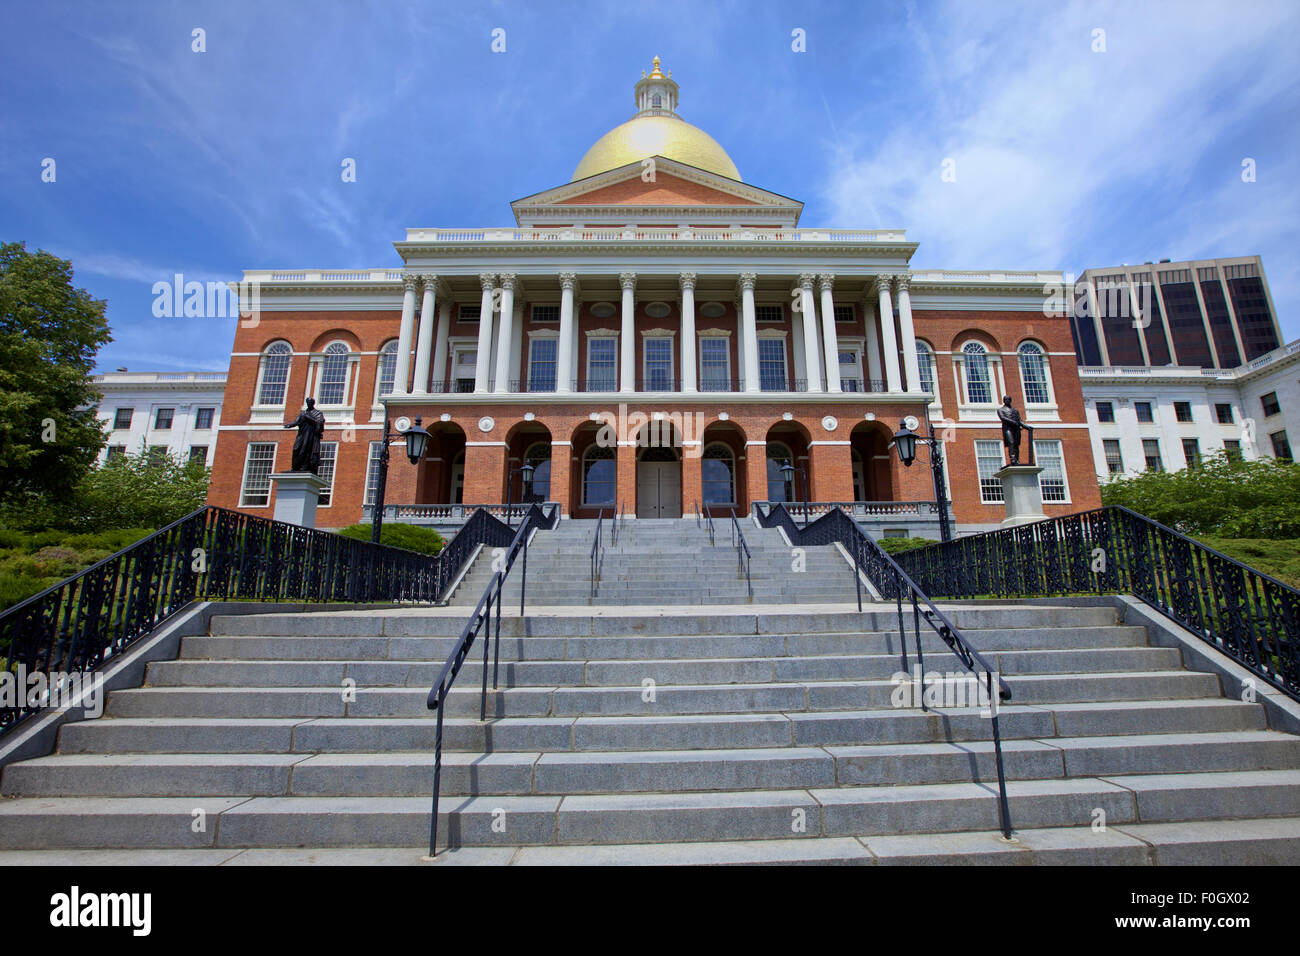 Massachusetts State House or the New State House, famous architecture on Boston Beacon Hill Stock Photo